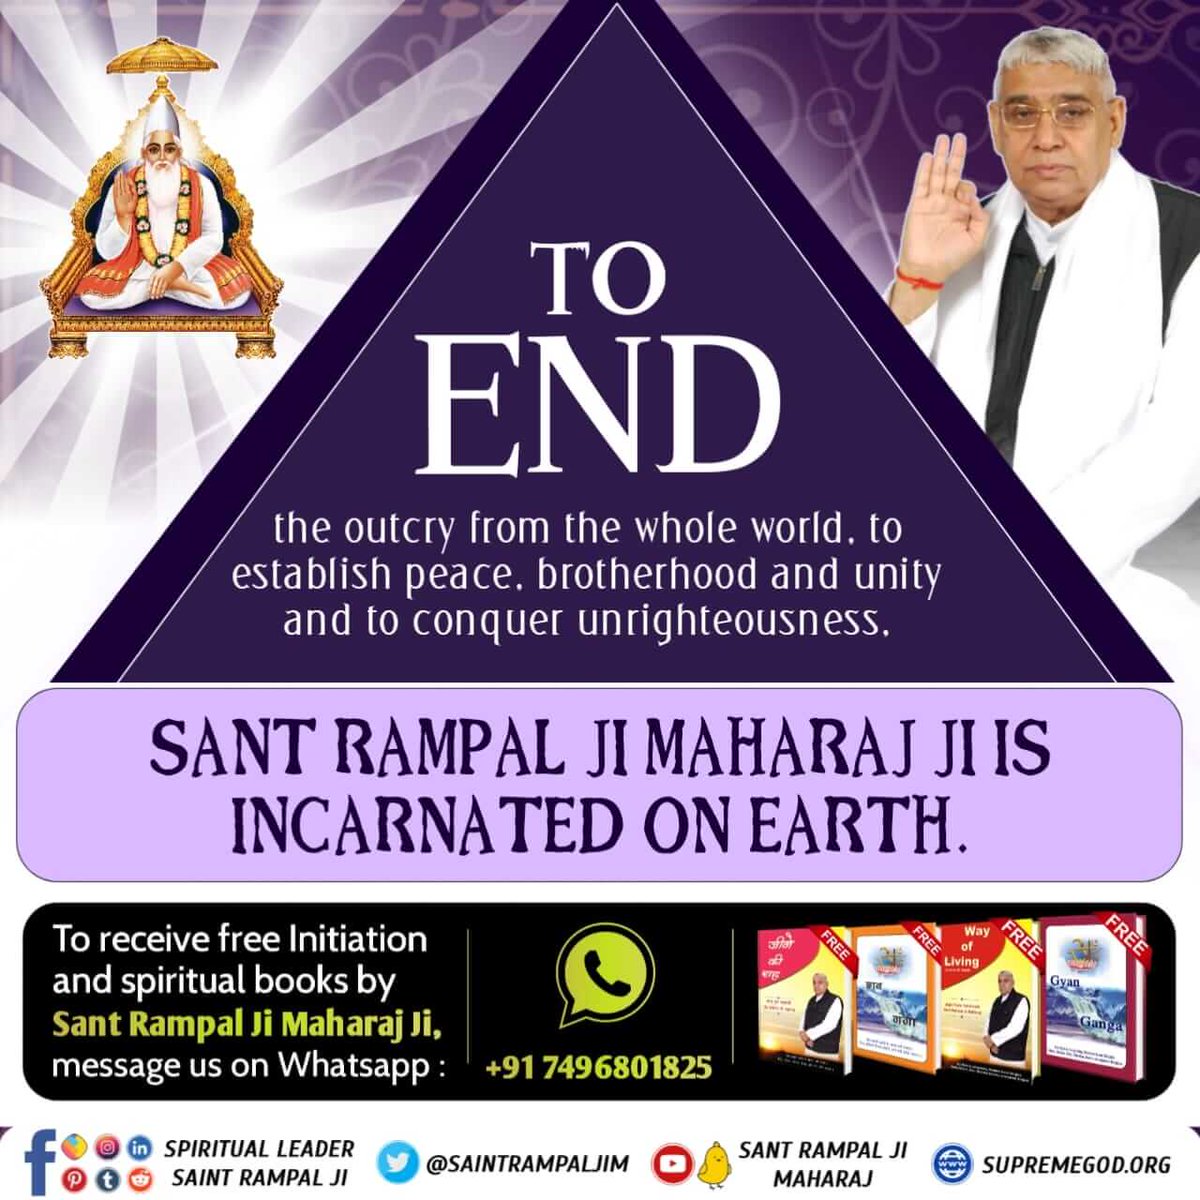 #धरती_को_स्वर्ग_बनाना_है All the sorrows we encounter in life are caused by our sins. By devoting ourselves to the Supreme God Kabir Ji, our sins are destroyed, and we attain happiness. Our home becomes like heaven. Sant Rampal Ji Maharaj